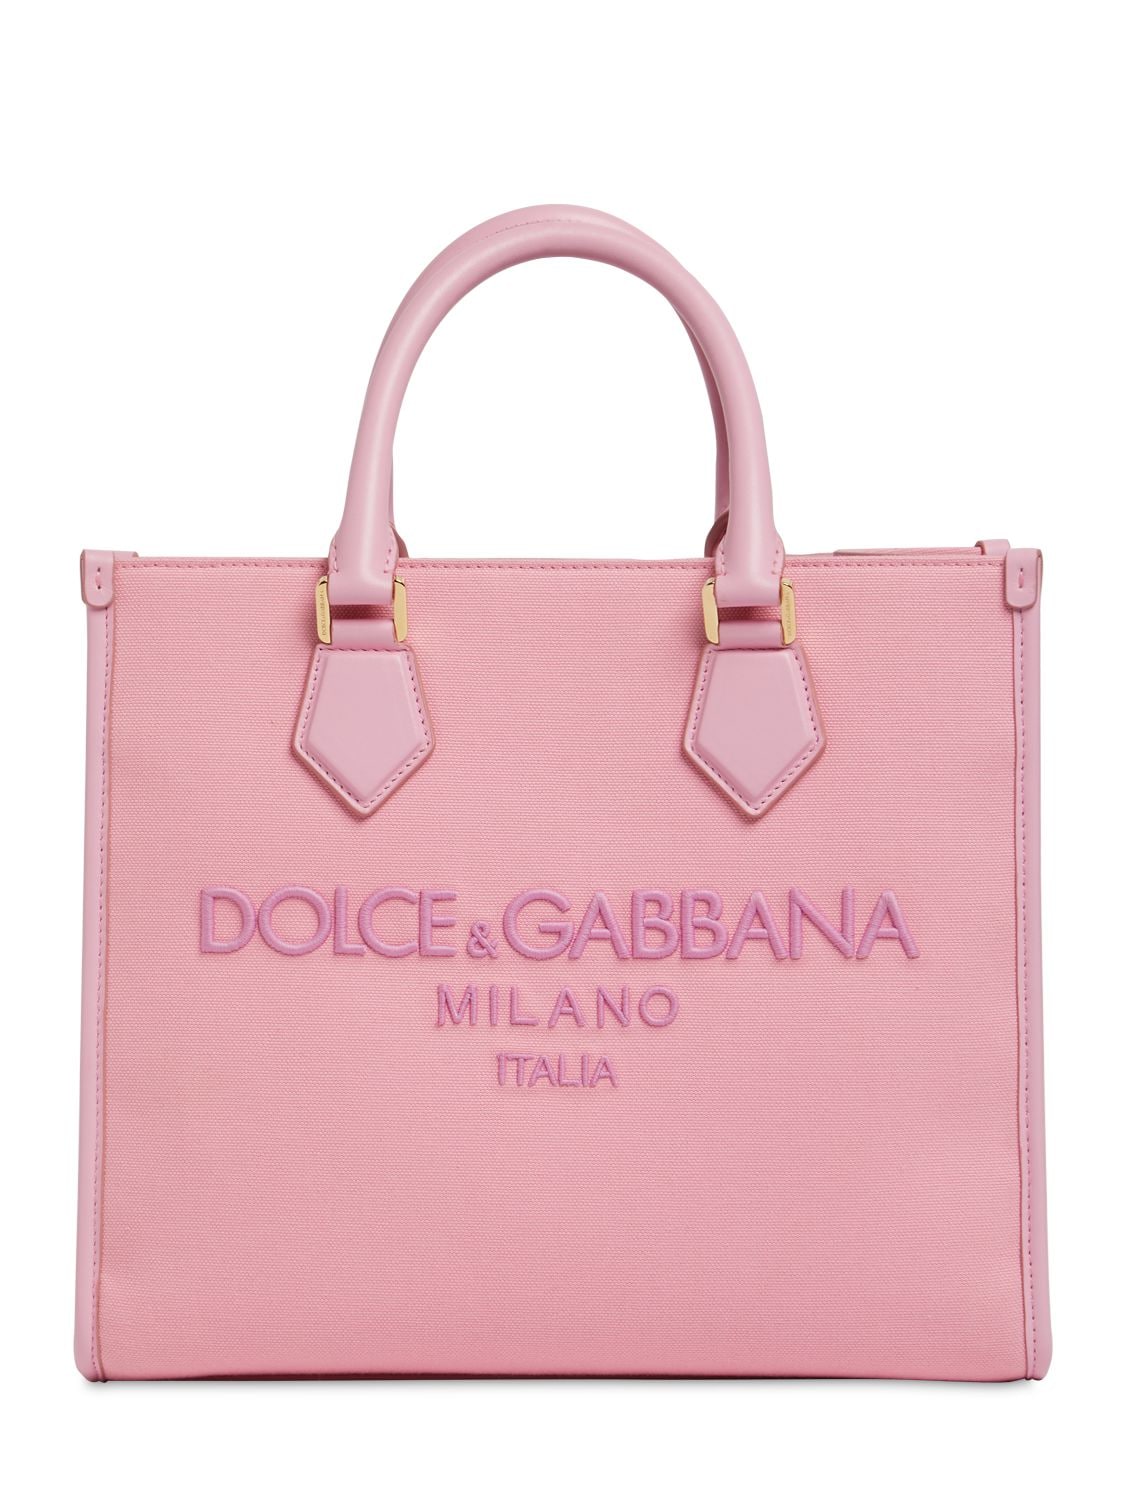 DOLCE & GABBANA Logo Embossed Canvas & Leather Tote Bag